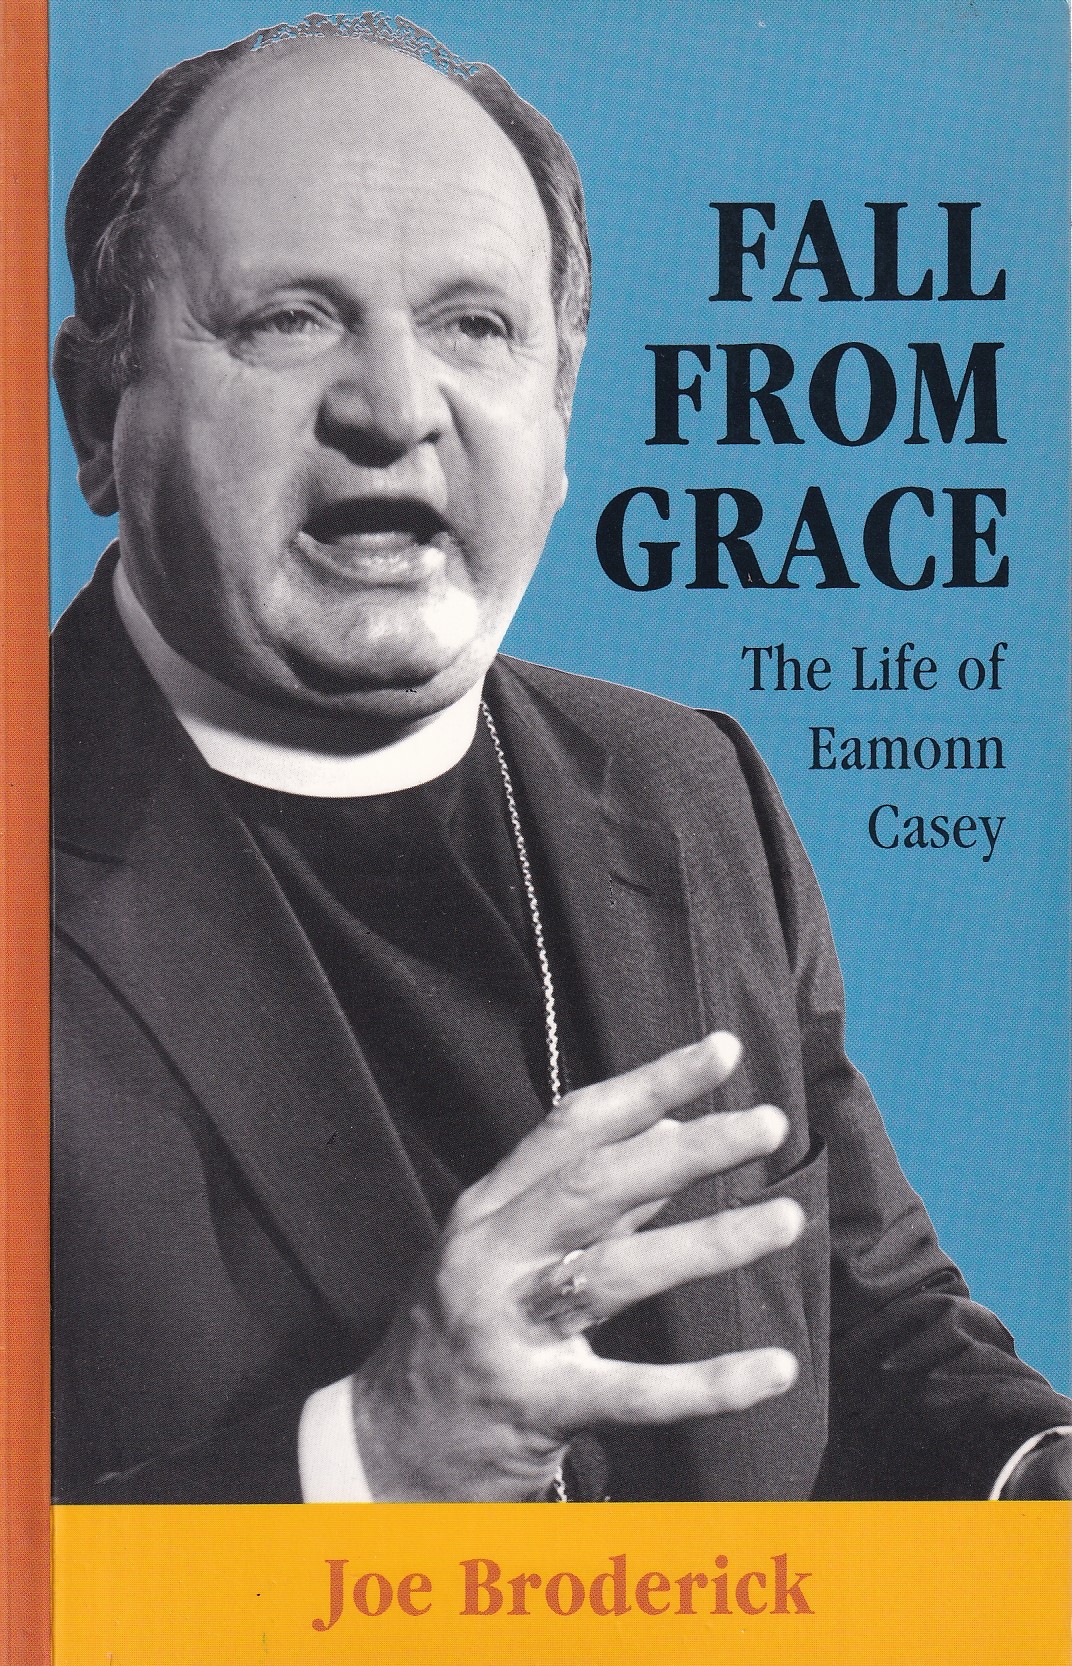 Fall From Grace: The Life of Eamonn Casey by Joe Broderick